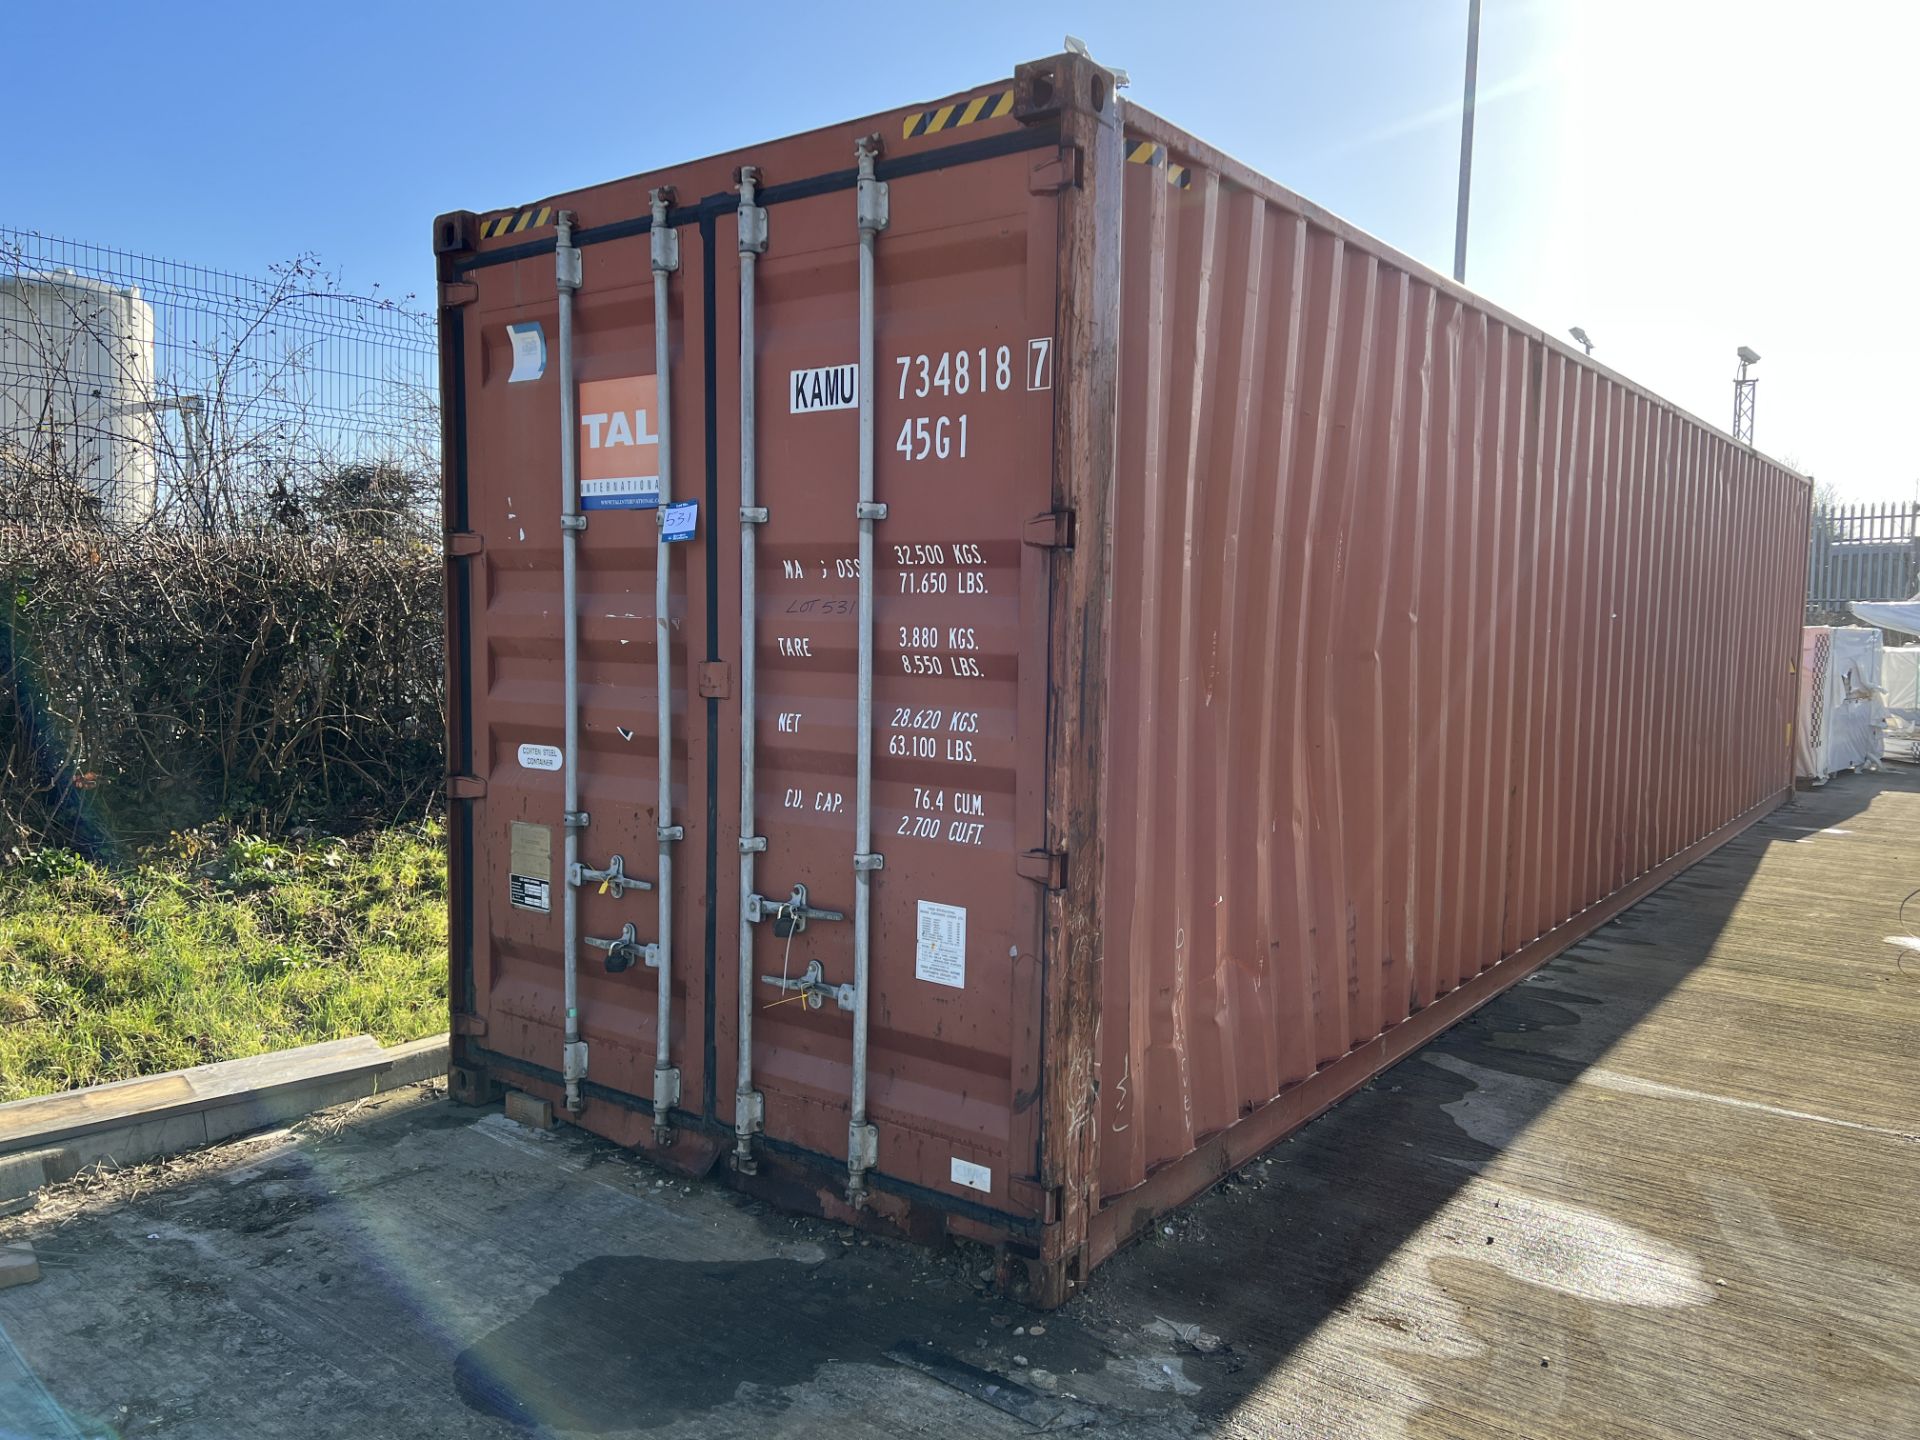 Tai International Container Corp 12m (L) x 2.4m (W) x 2.9 m (H) steel shipping container with double